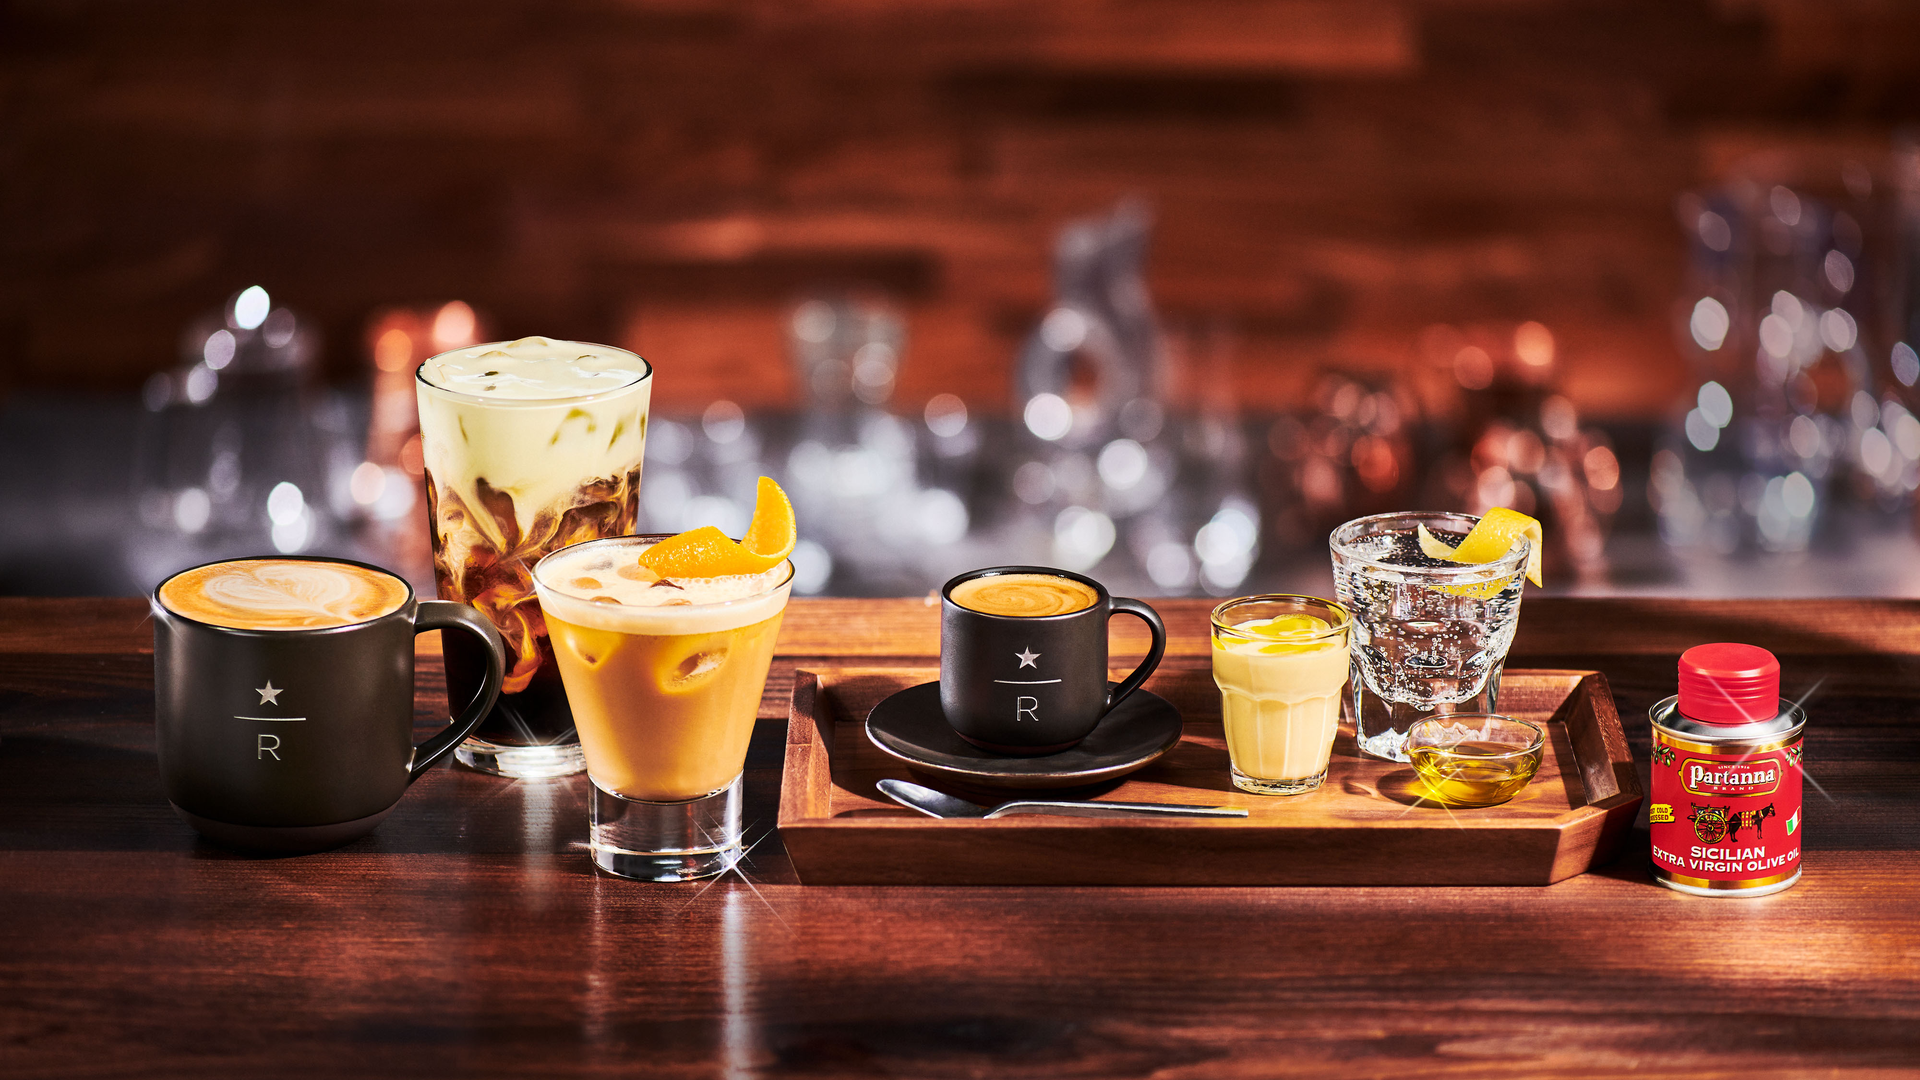 A row of different kinds of coffee drinks on a wooden bar or table.